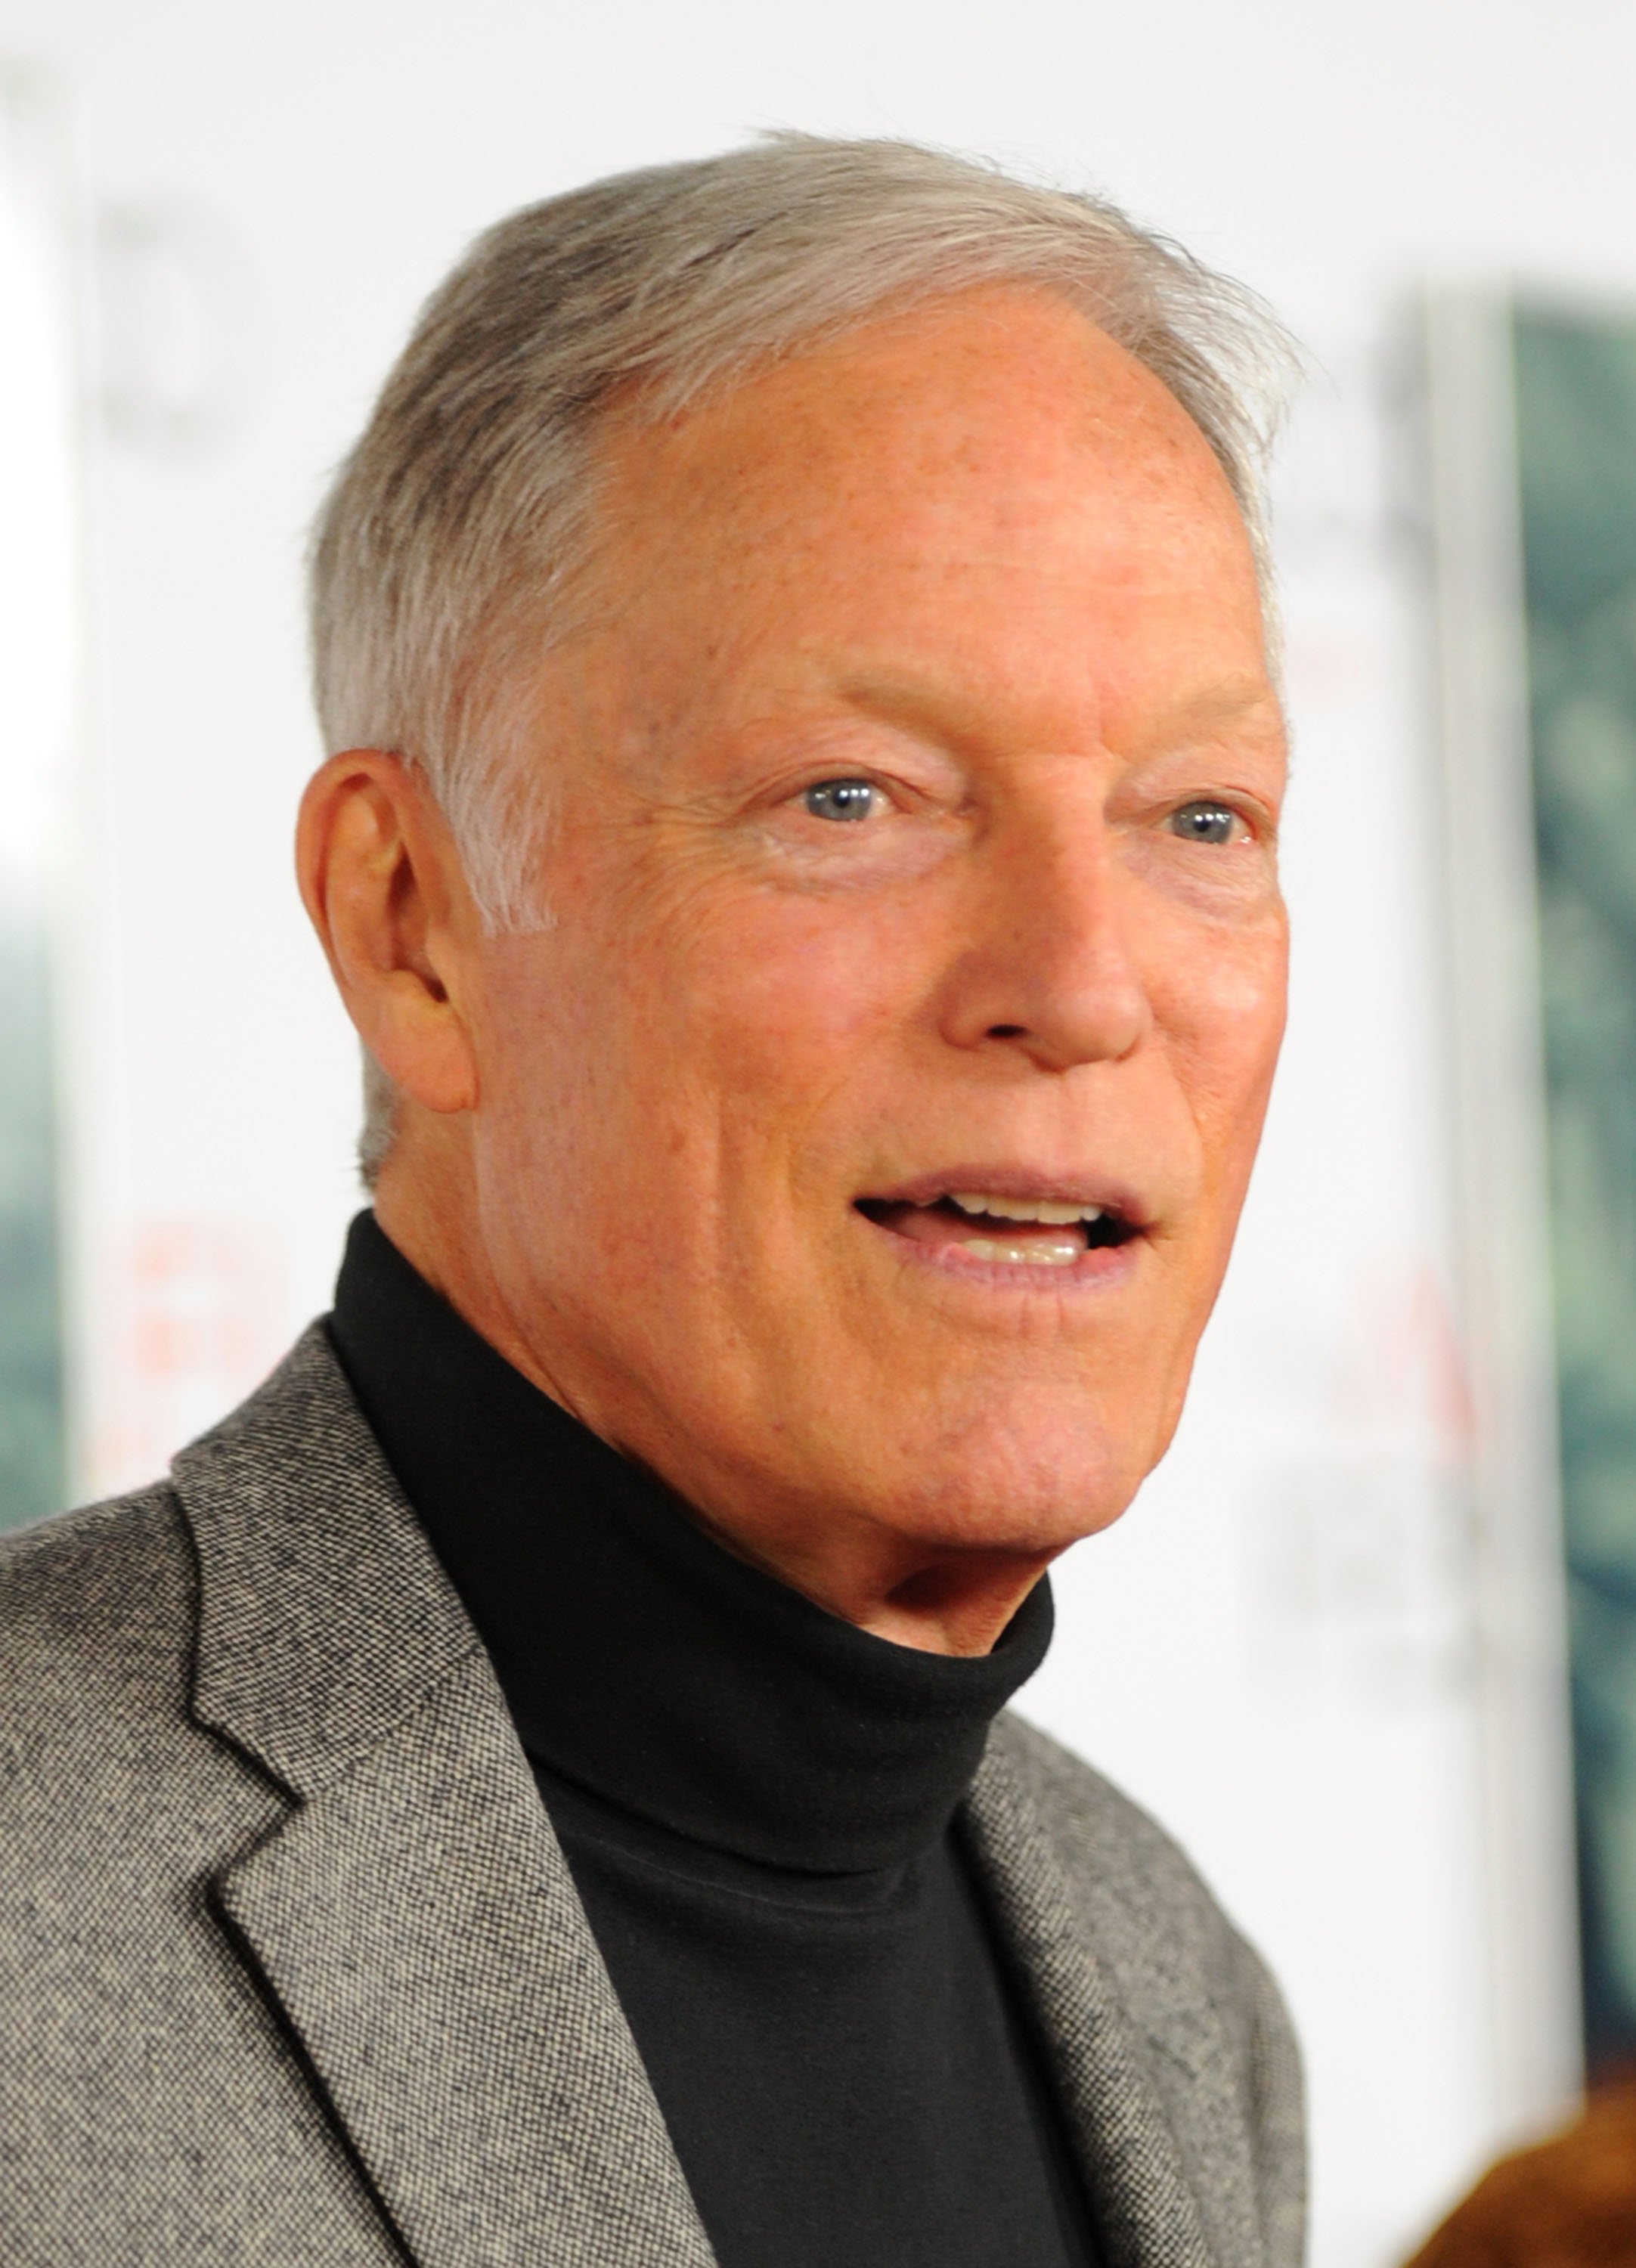 Richard Chamberlain on November 9, 2011 in Hollywood, California | Photo: Getty Images